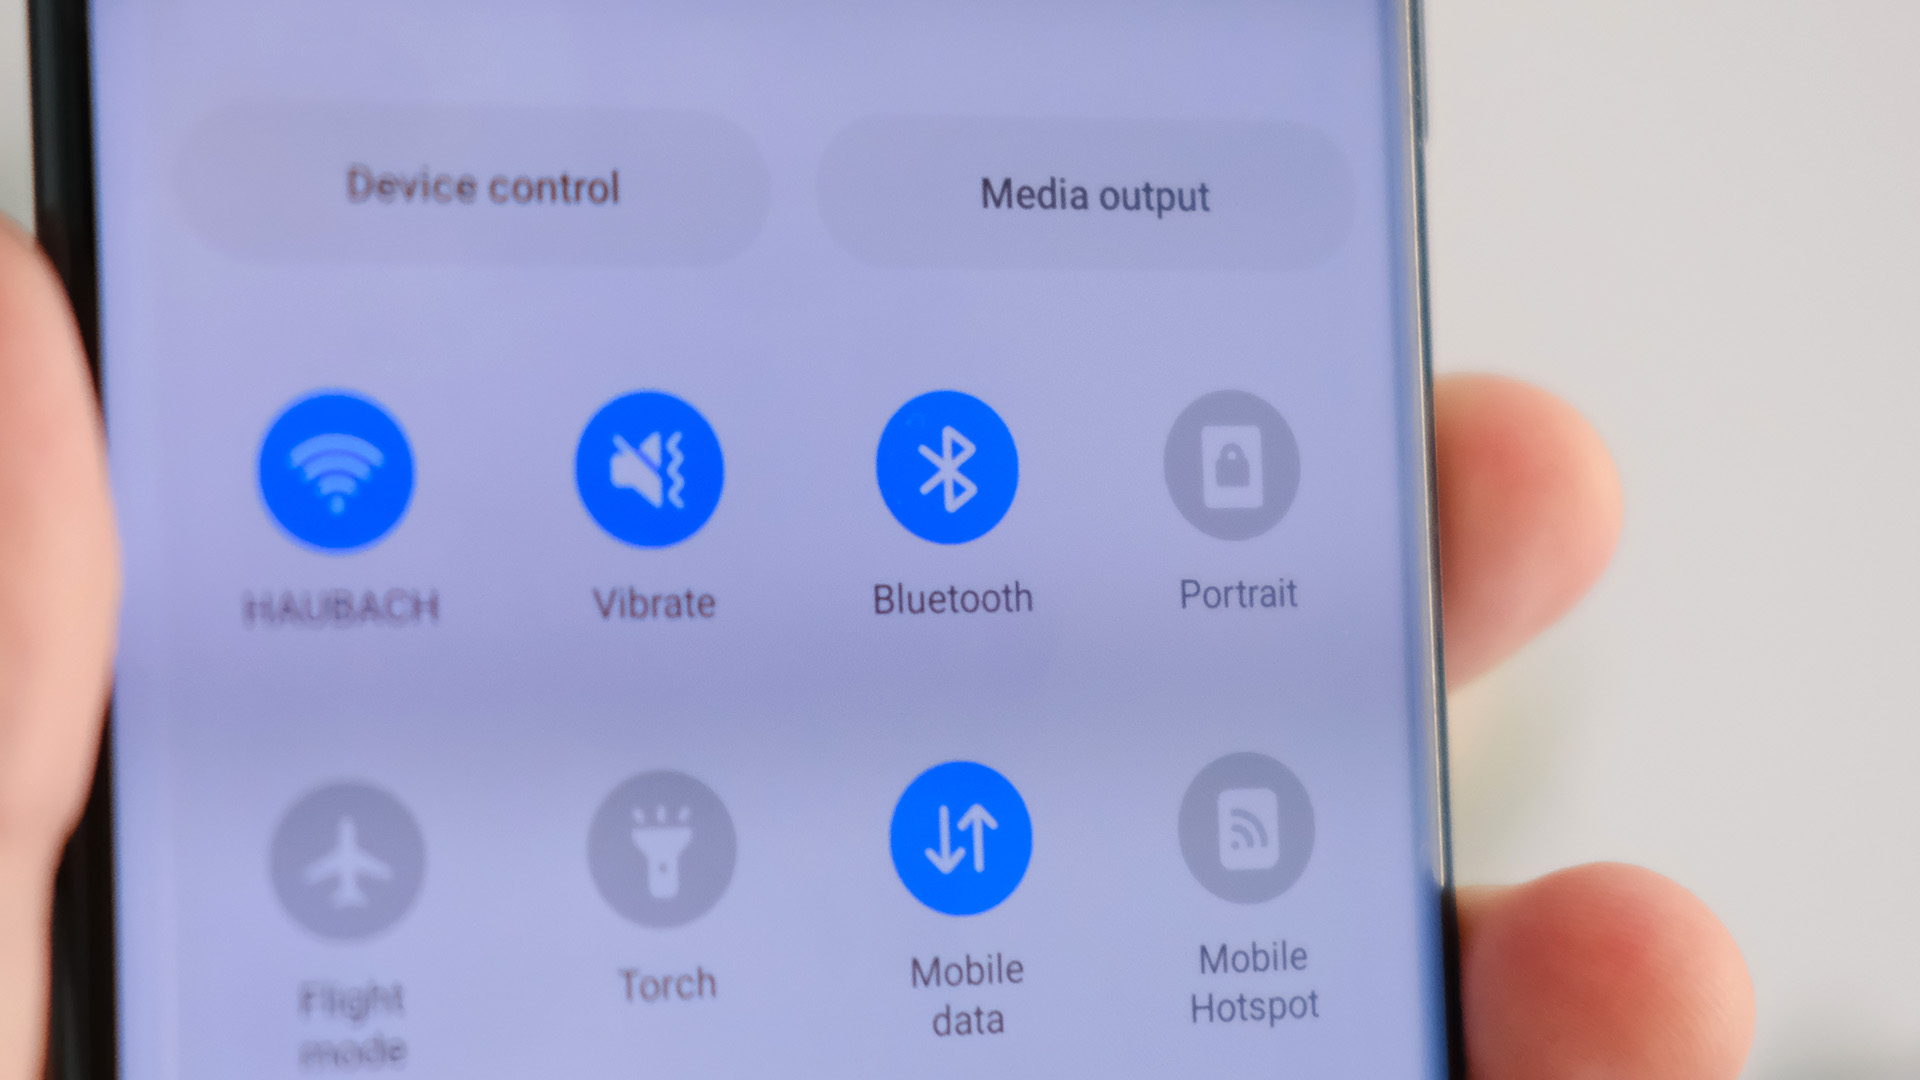 A Bluetooth icon shown on the screen of smartphone in its settings menu.